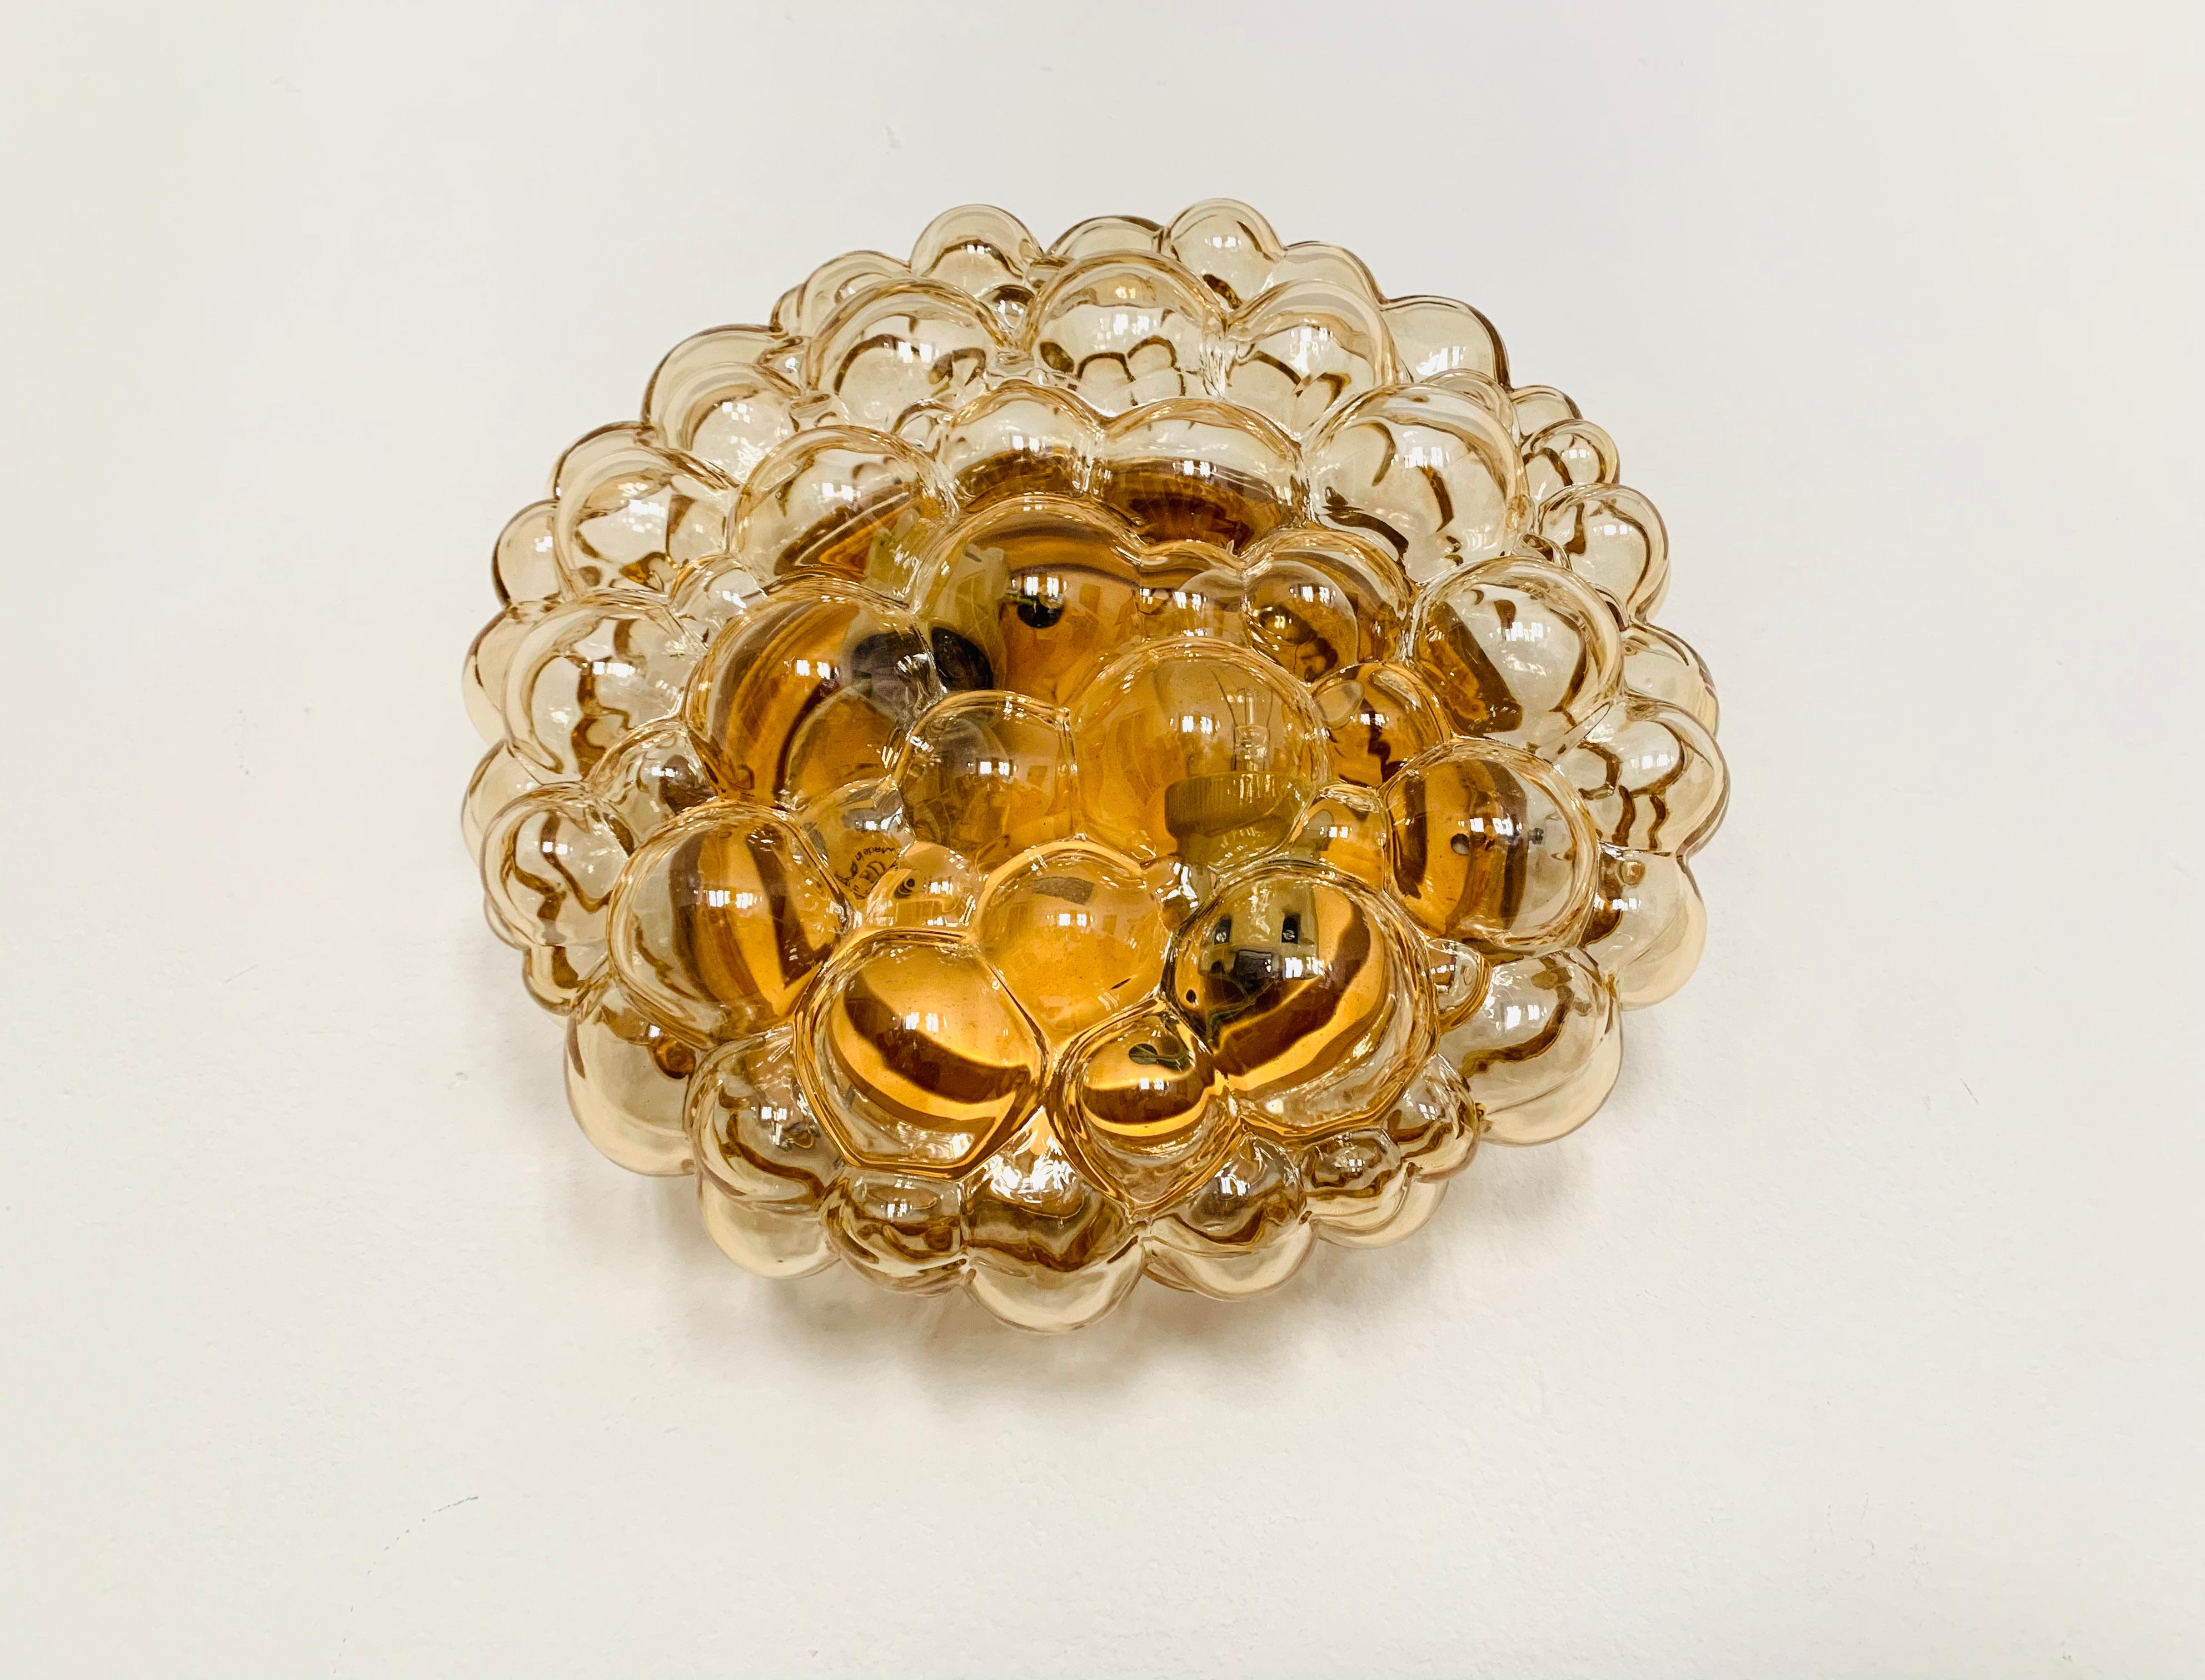 Exceptionally large and beautiful bubble wall or ceiling lamp from the 1960s.
Fantastic design and high quality workmanship.
The lamp impresses with its imposing size and the spectacular play of light.

Condition:

Very good vintage condition with